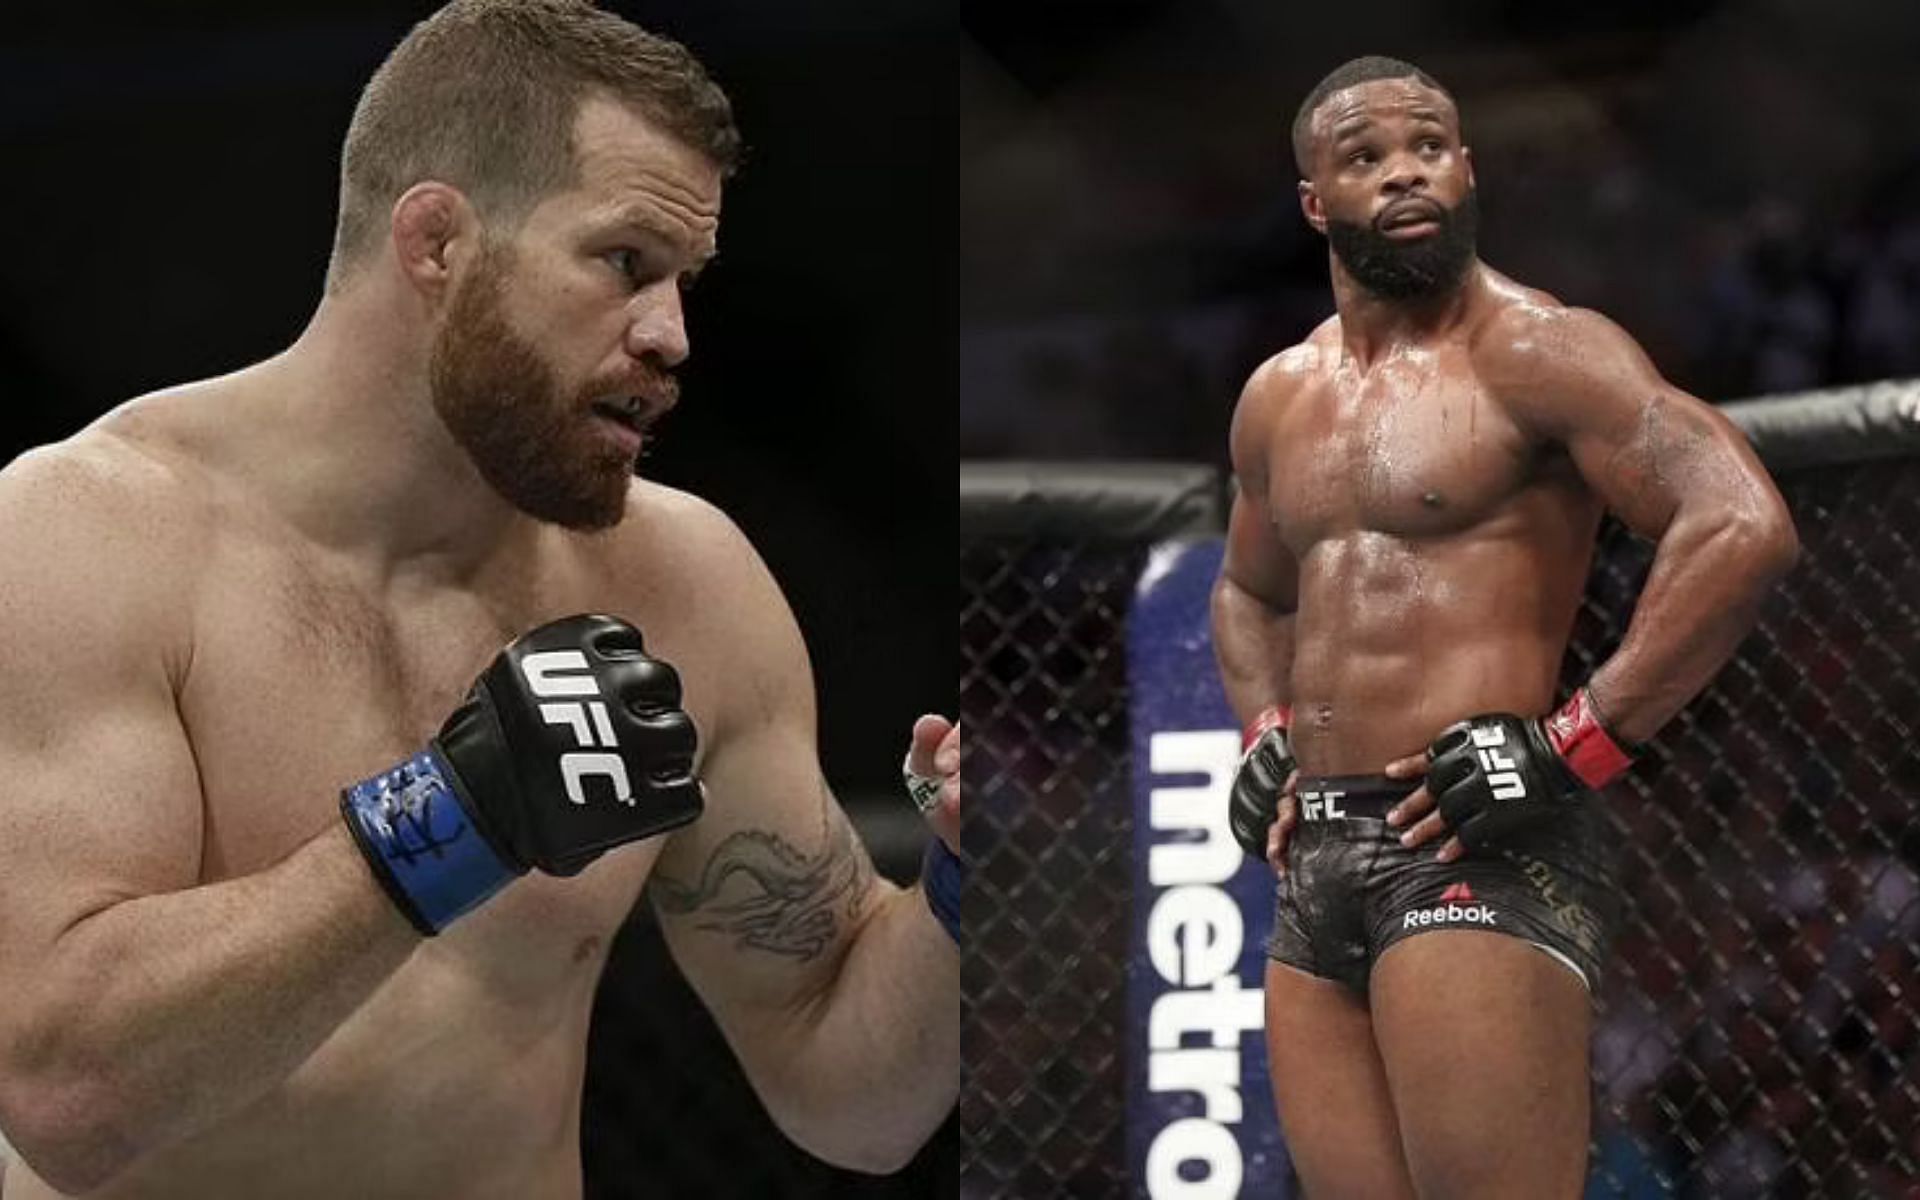 Nate Marquardt (left) and Tyron Woodley (right)